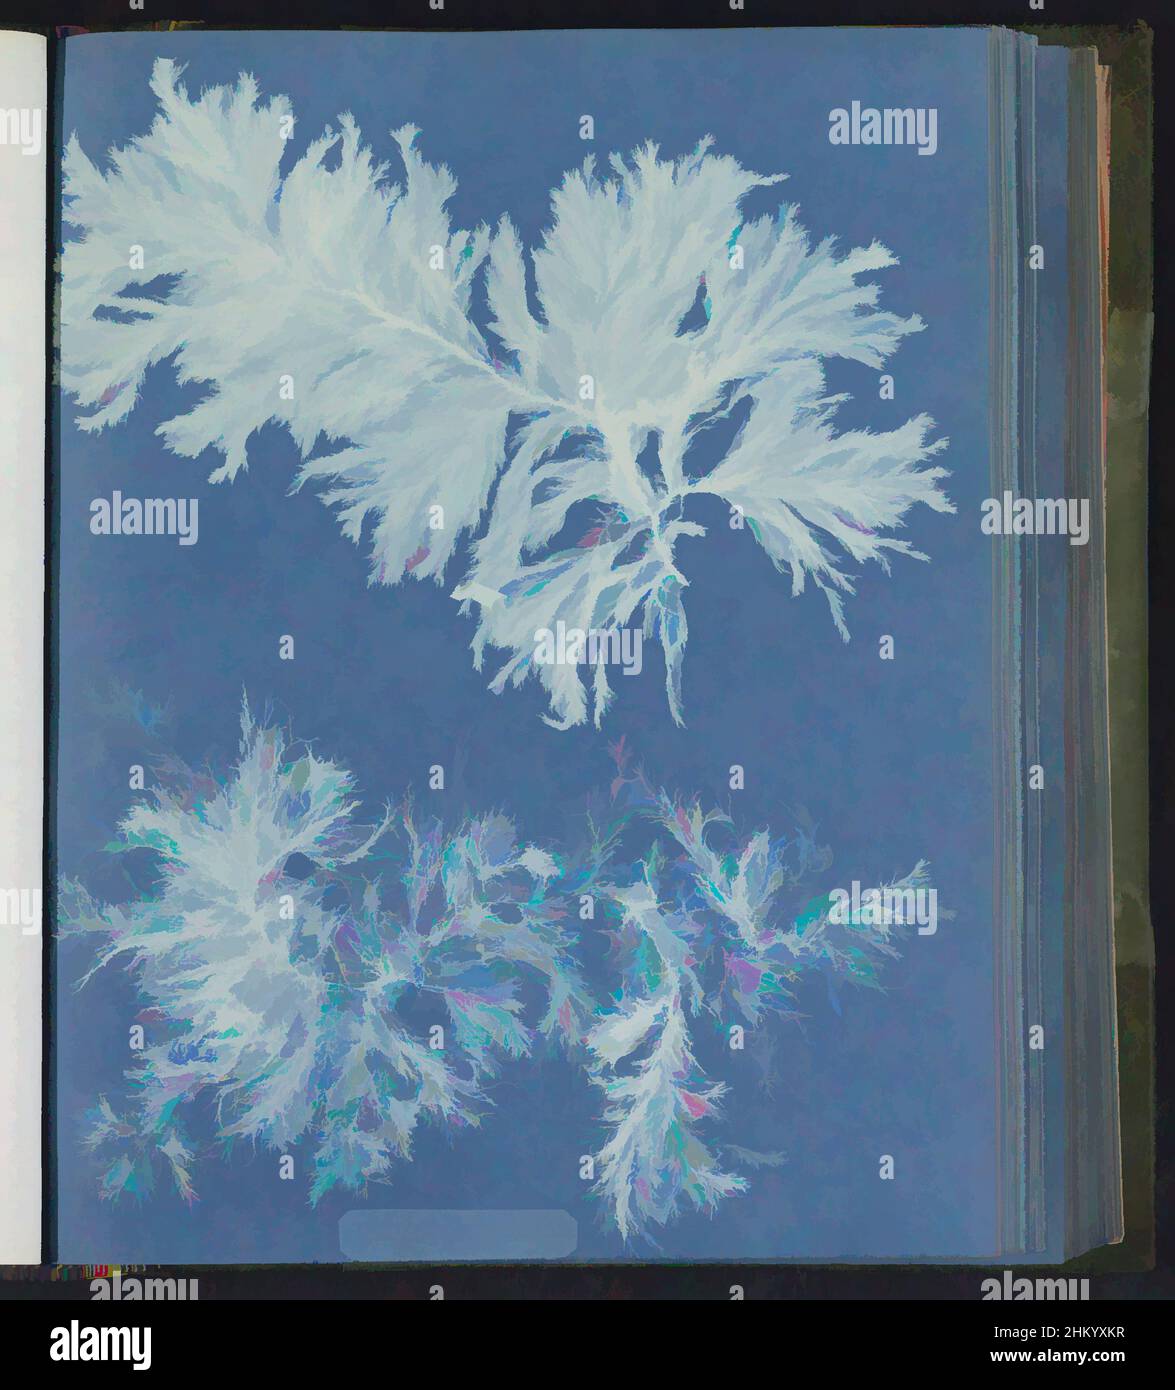 Art inspired by Conferva gracilis, Anna Atkins, United Kingdom, c. 1843 - c. 1853, photographic support, cyanotype, height 250 mm × width 200 mm, Classic works modernized by Artotop with a splash of modernity. Shapes, color and value, eye-catching visual impact on art. Emotions through freedom of artworks in a contemporary way. A timeless message pursuing a wildly creative new direction. Artists turning to the digital medium and creating the Artotop NFT Stock Photo